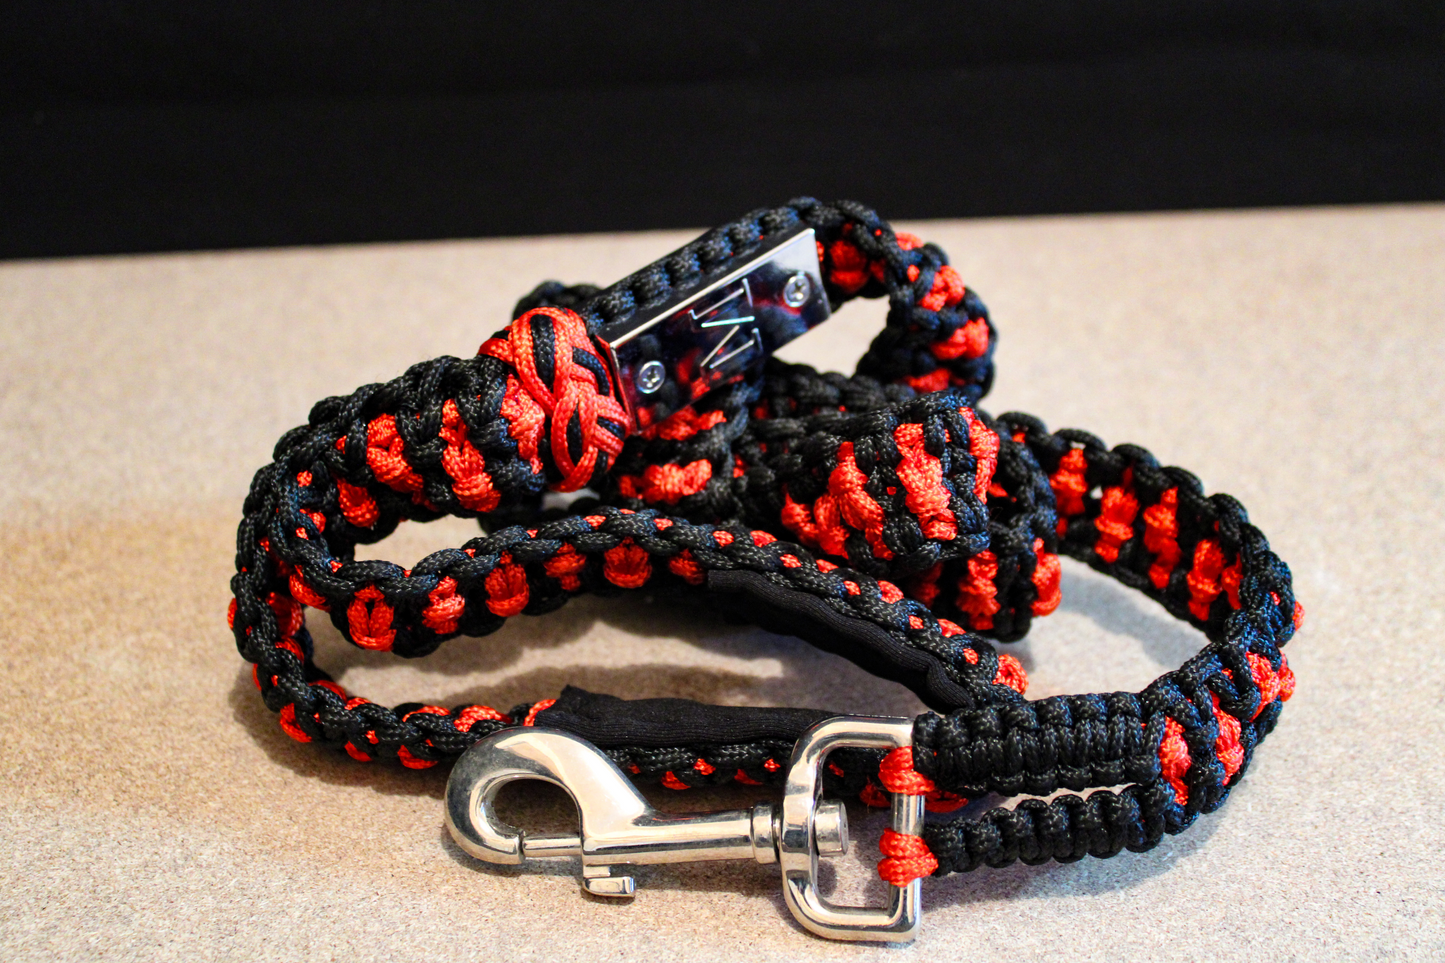 Mariner Hand-Tied Dog Leash (non-glowing)